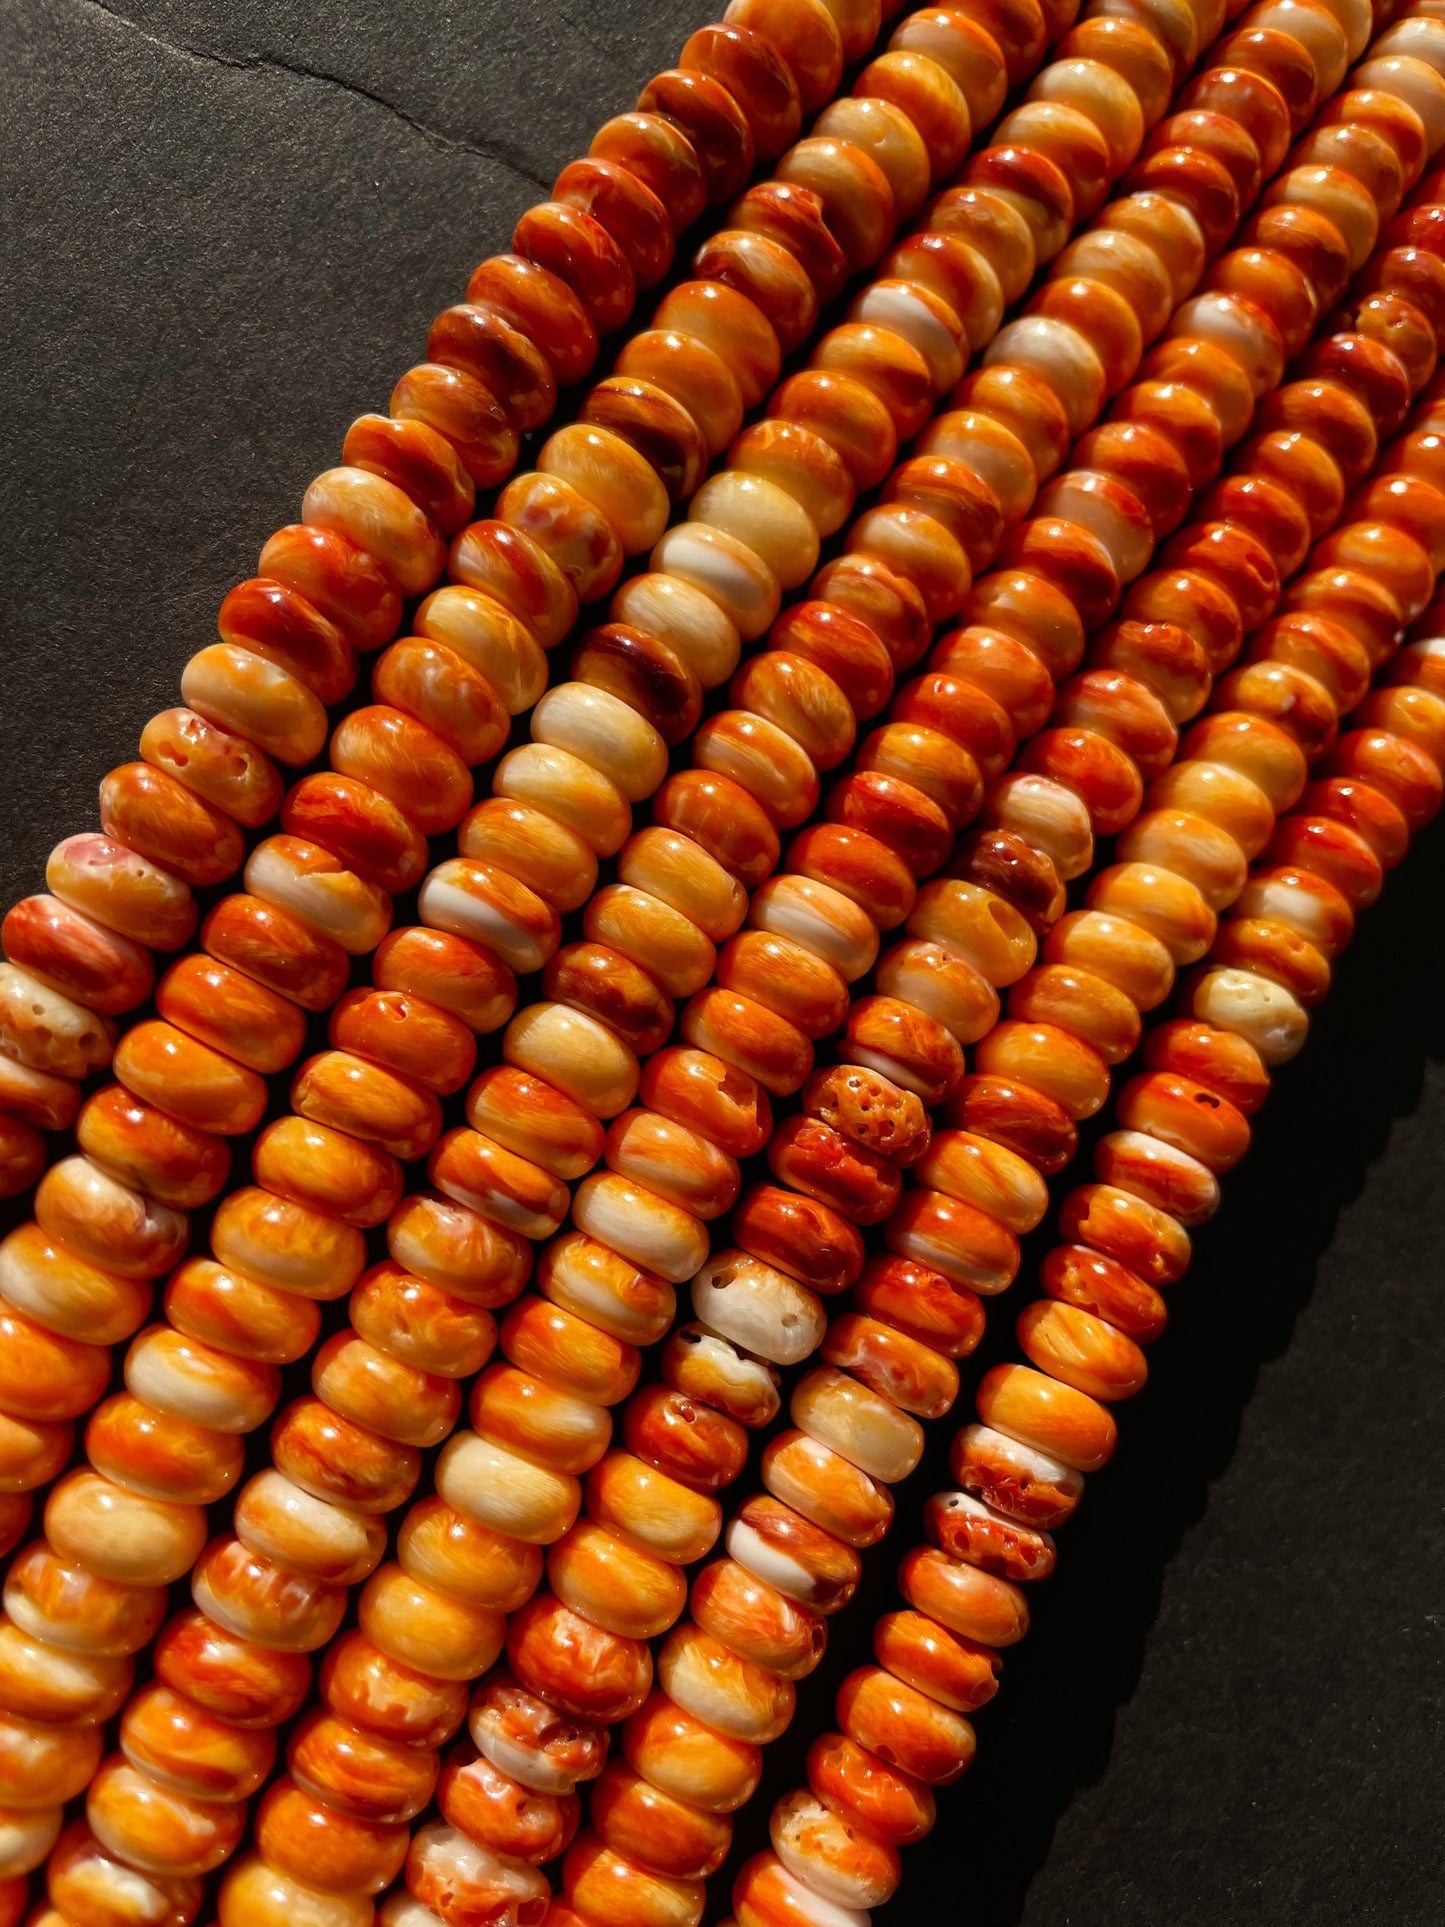 AAA Natural Spiny Oyster Shell Bead 5x8mm Rondelle Shape, Beautiful Natural Orange Yellow Color Spiny Oyster Shells, Full Strand 15.5"